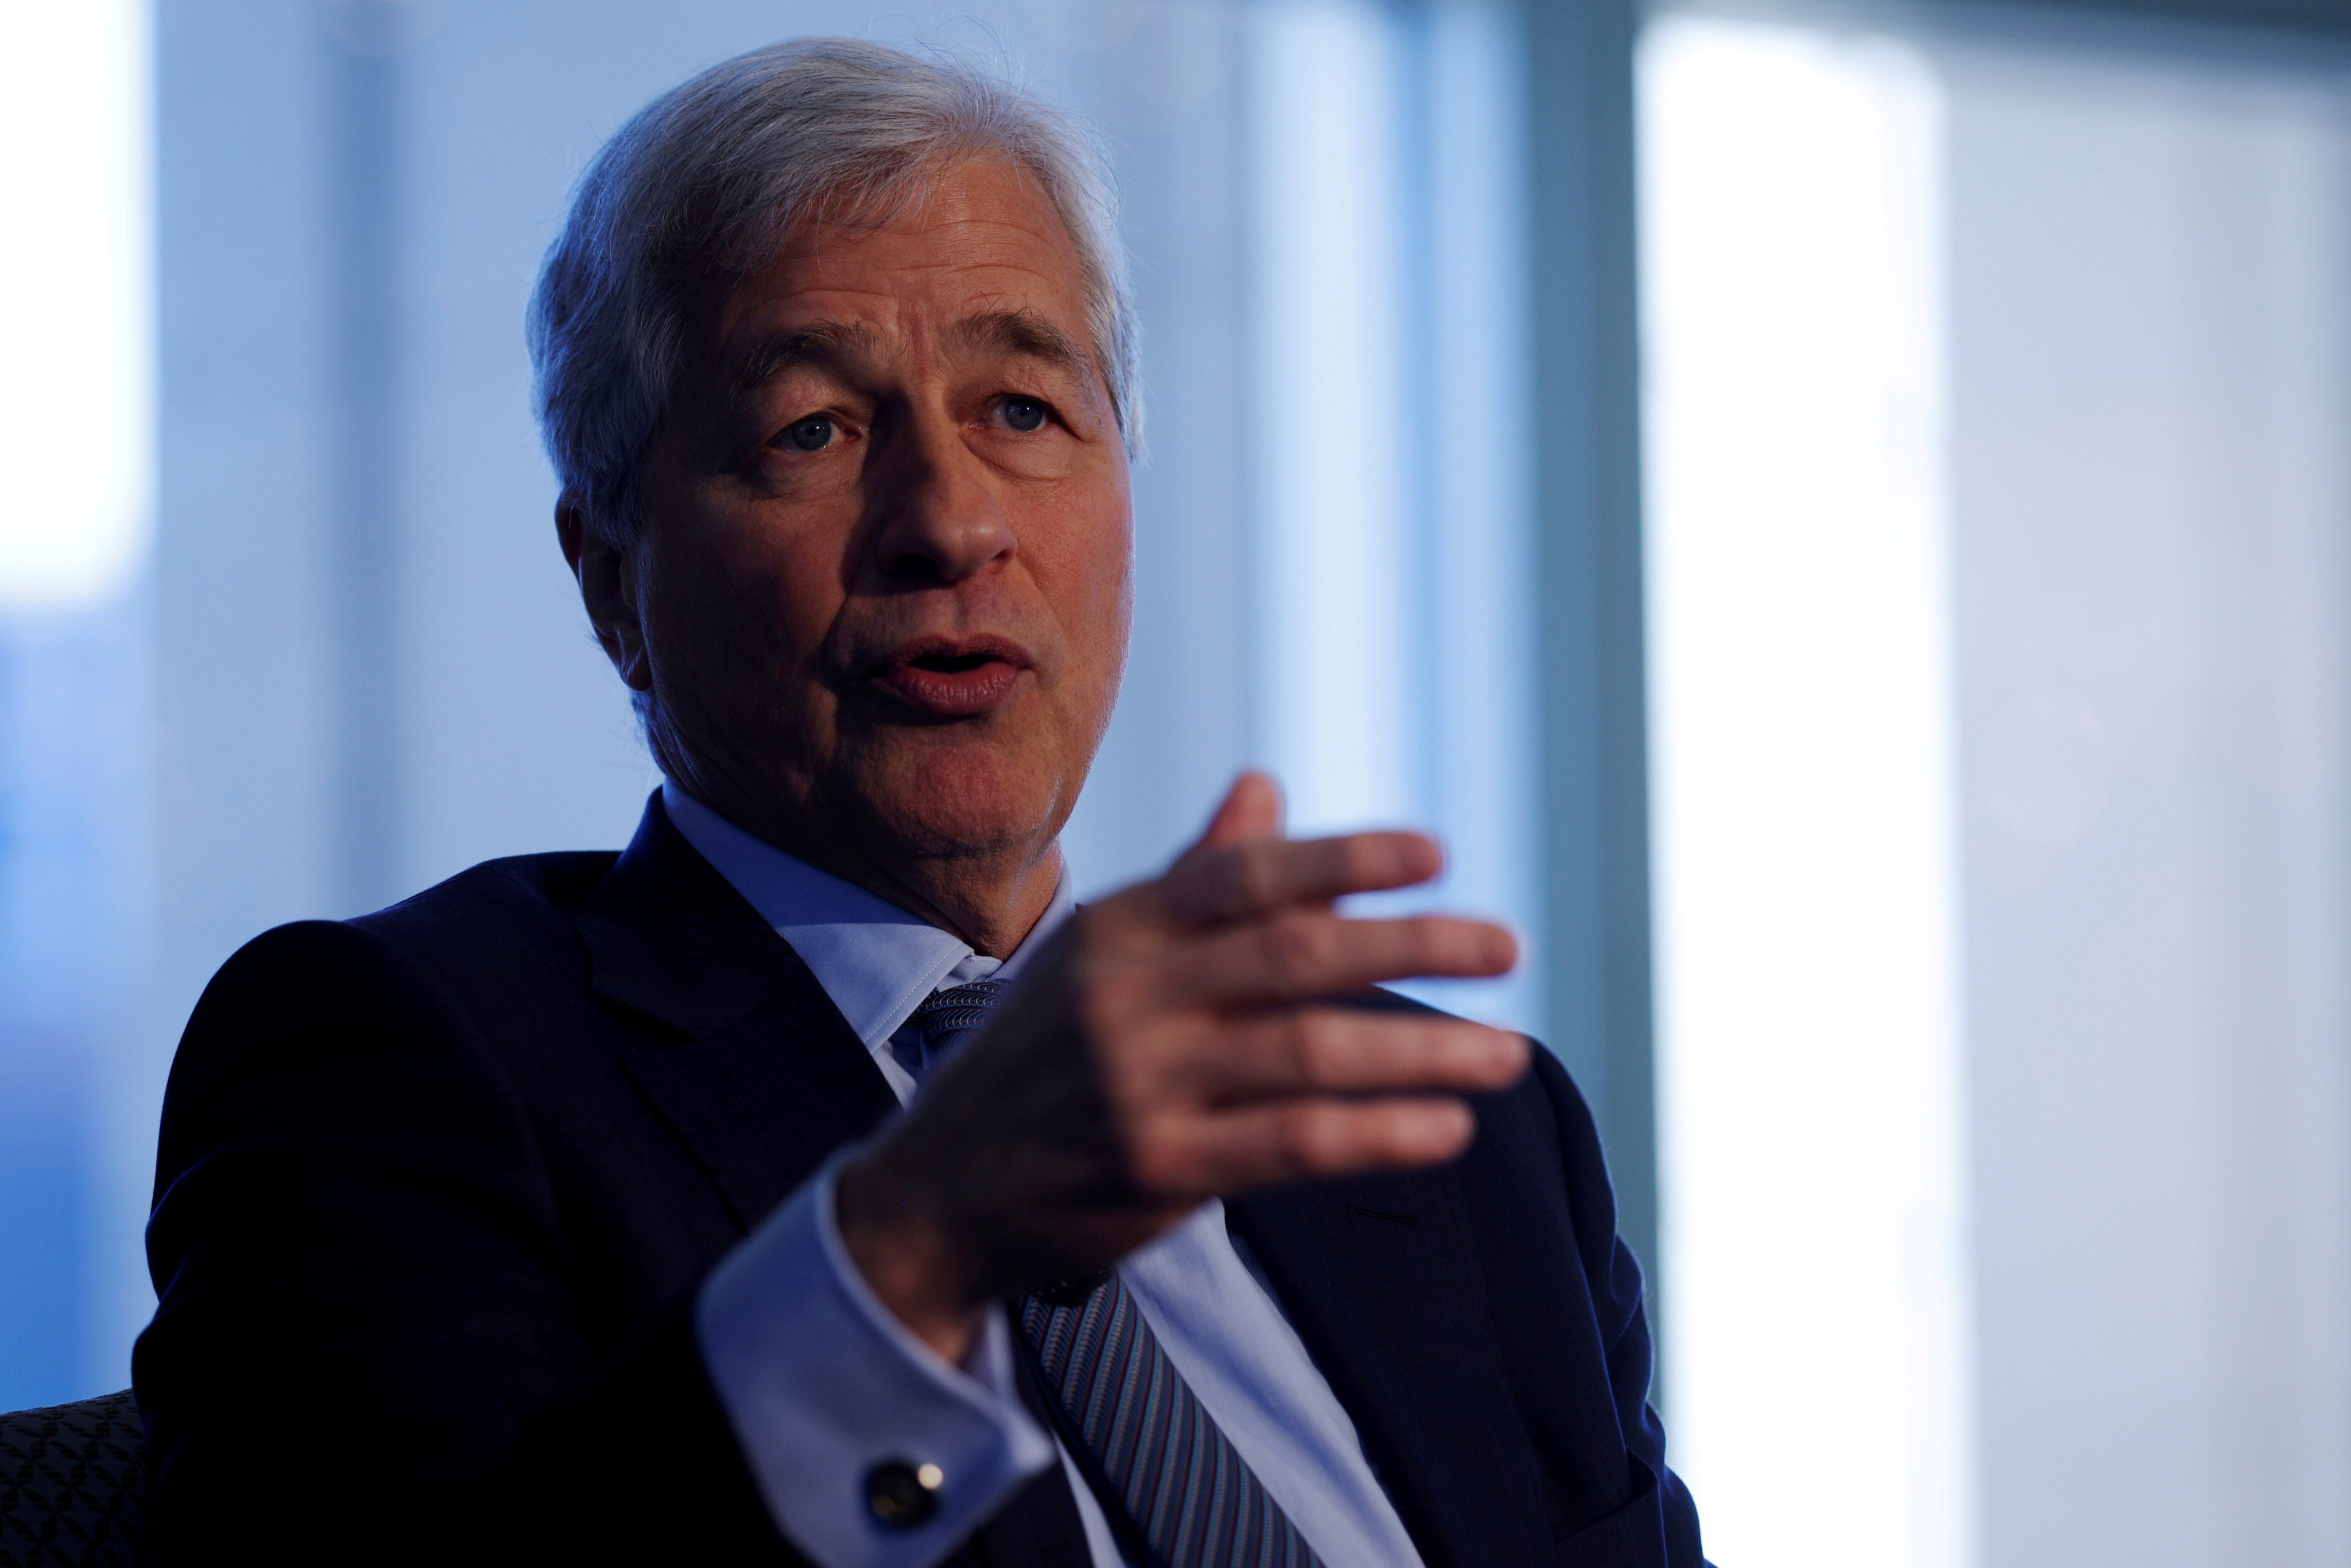 JPMorgan CEO Jamie Dimon speaks at a Boston College Chief Executives Club lunch event on Tuesday. Photo: Reuters